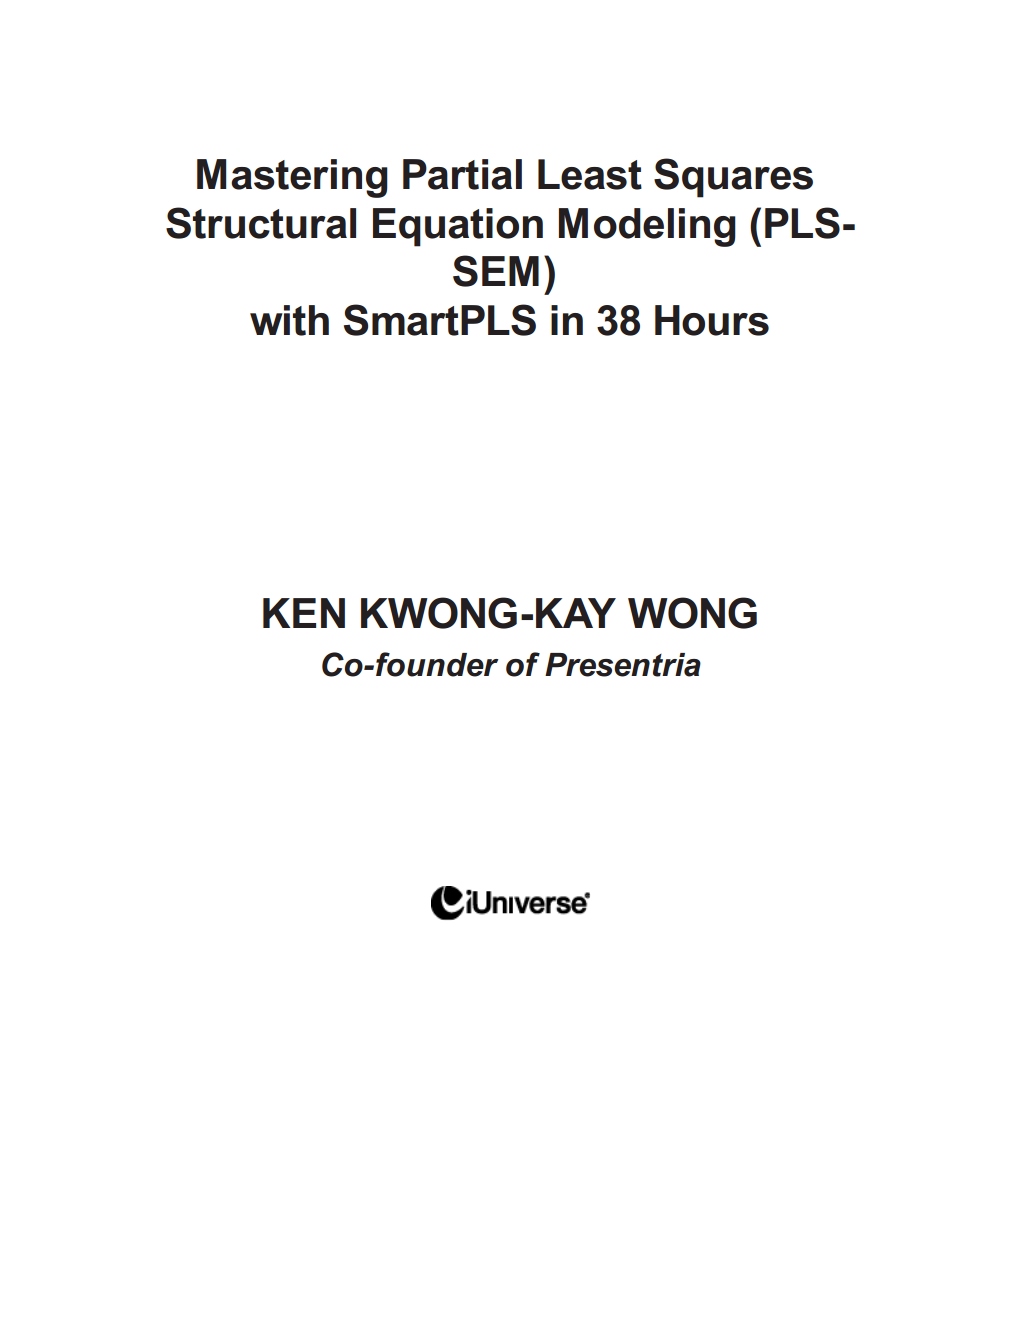 Mastering Partial Least Squares Structural Equation Modeling (Pls-Sem) with Smartpls in 38 Hours